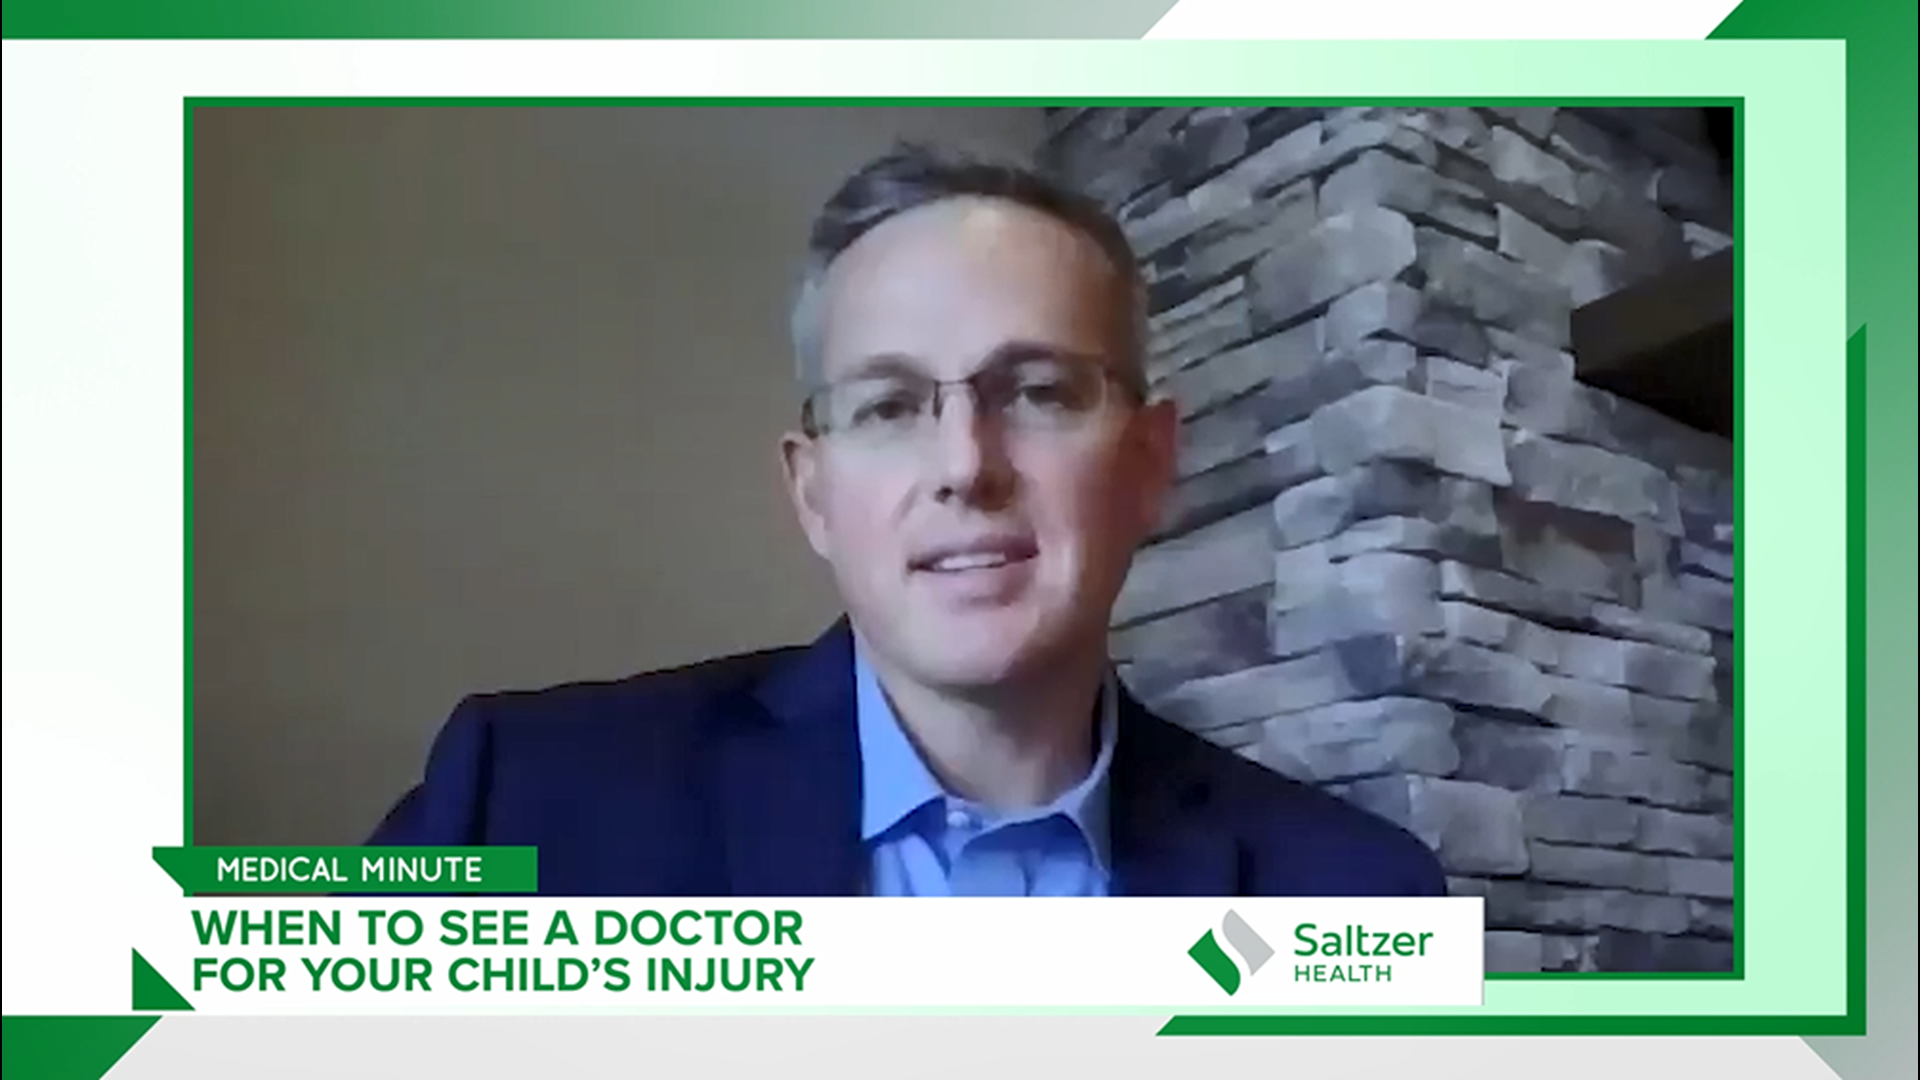 Wrist & elbow injuries are common for kids. Dr. Corbett Winegar with Saltzer Health gives tips on how to prevent injuries & when to see a doctor.